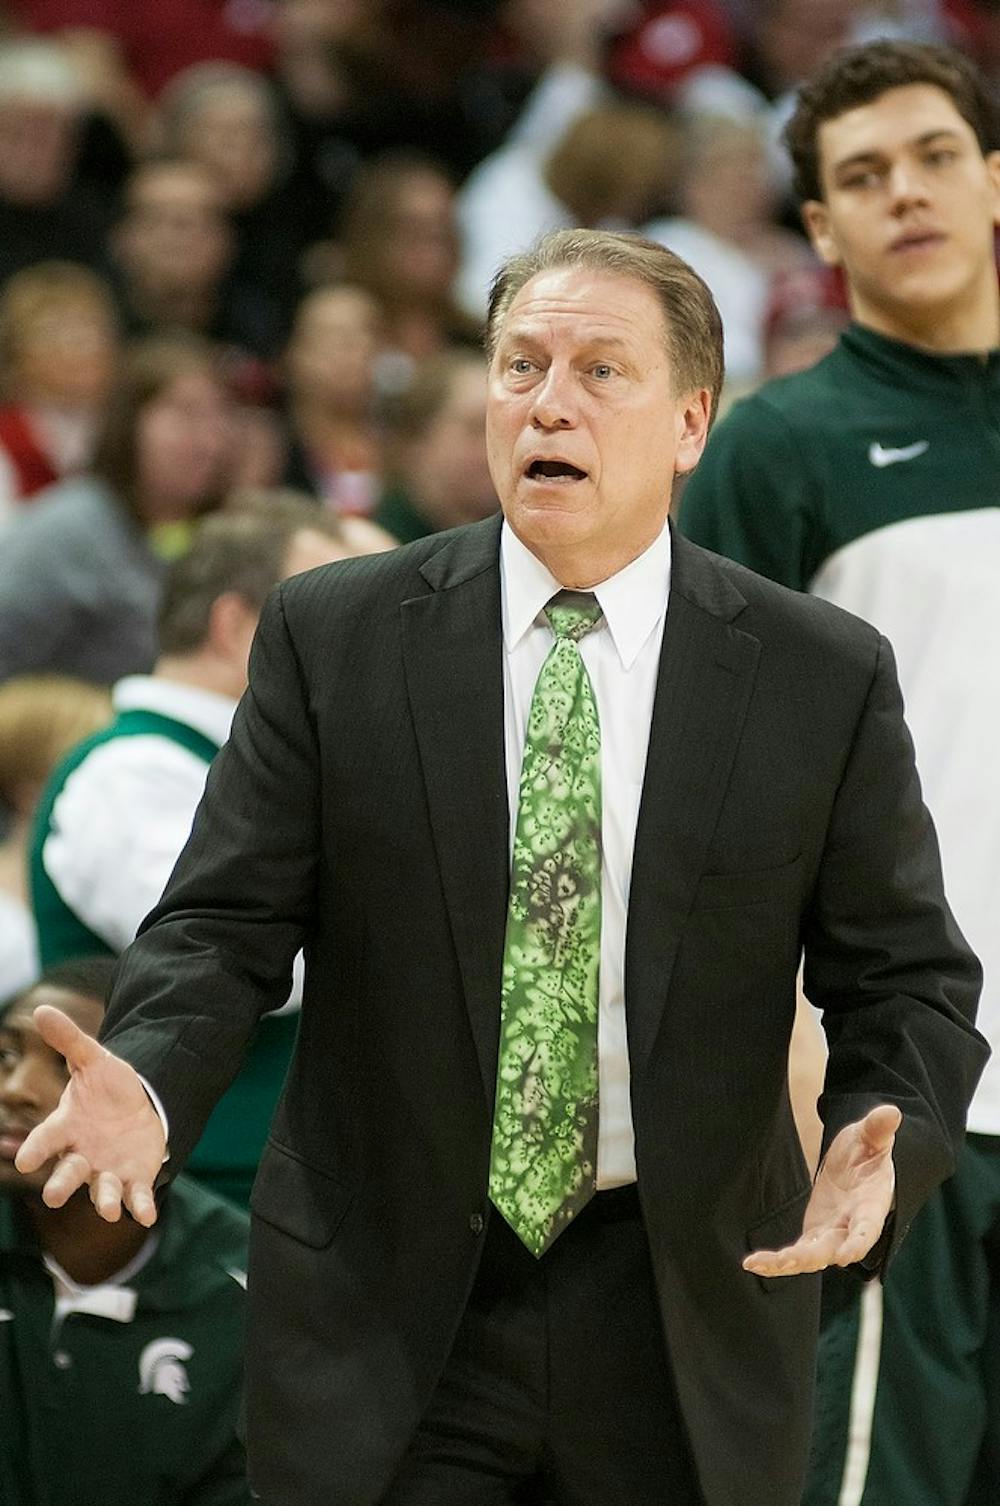 	<p>Head coach Tom Izzo reacts to a call during the game against Wisconsin on Feb. 9, 2014, at Kohl Center in Madison, Wis. The Spartans lost to the Badgers, 60-58. Danyelle Morrow/The State News</p>